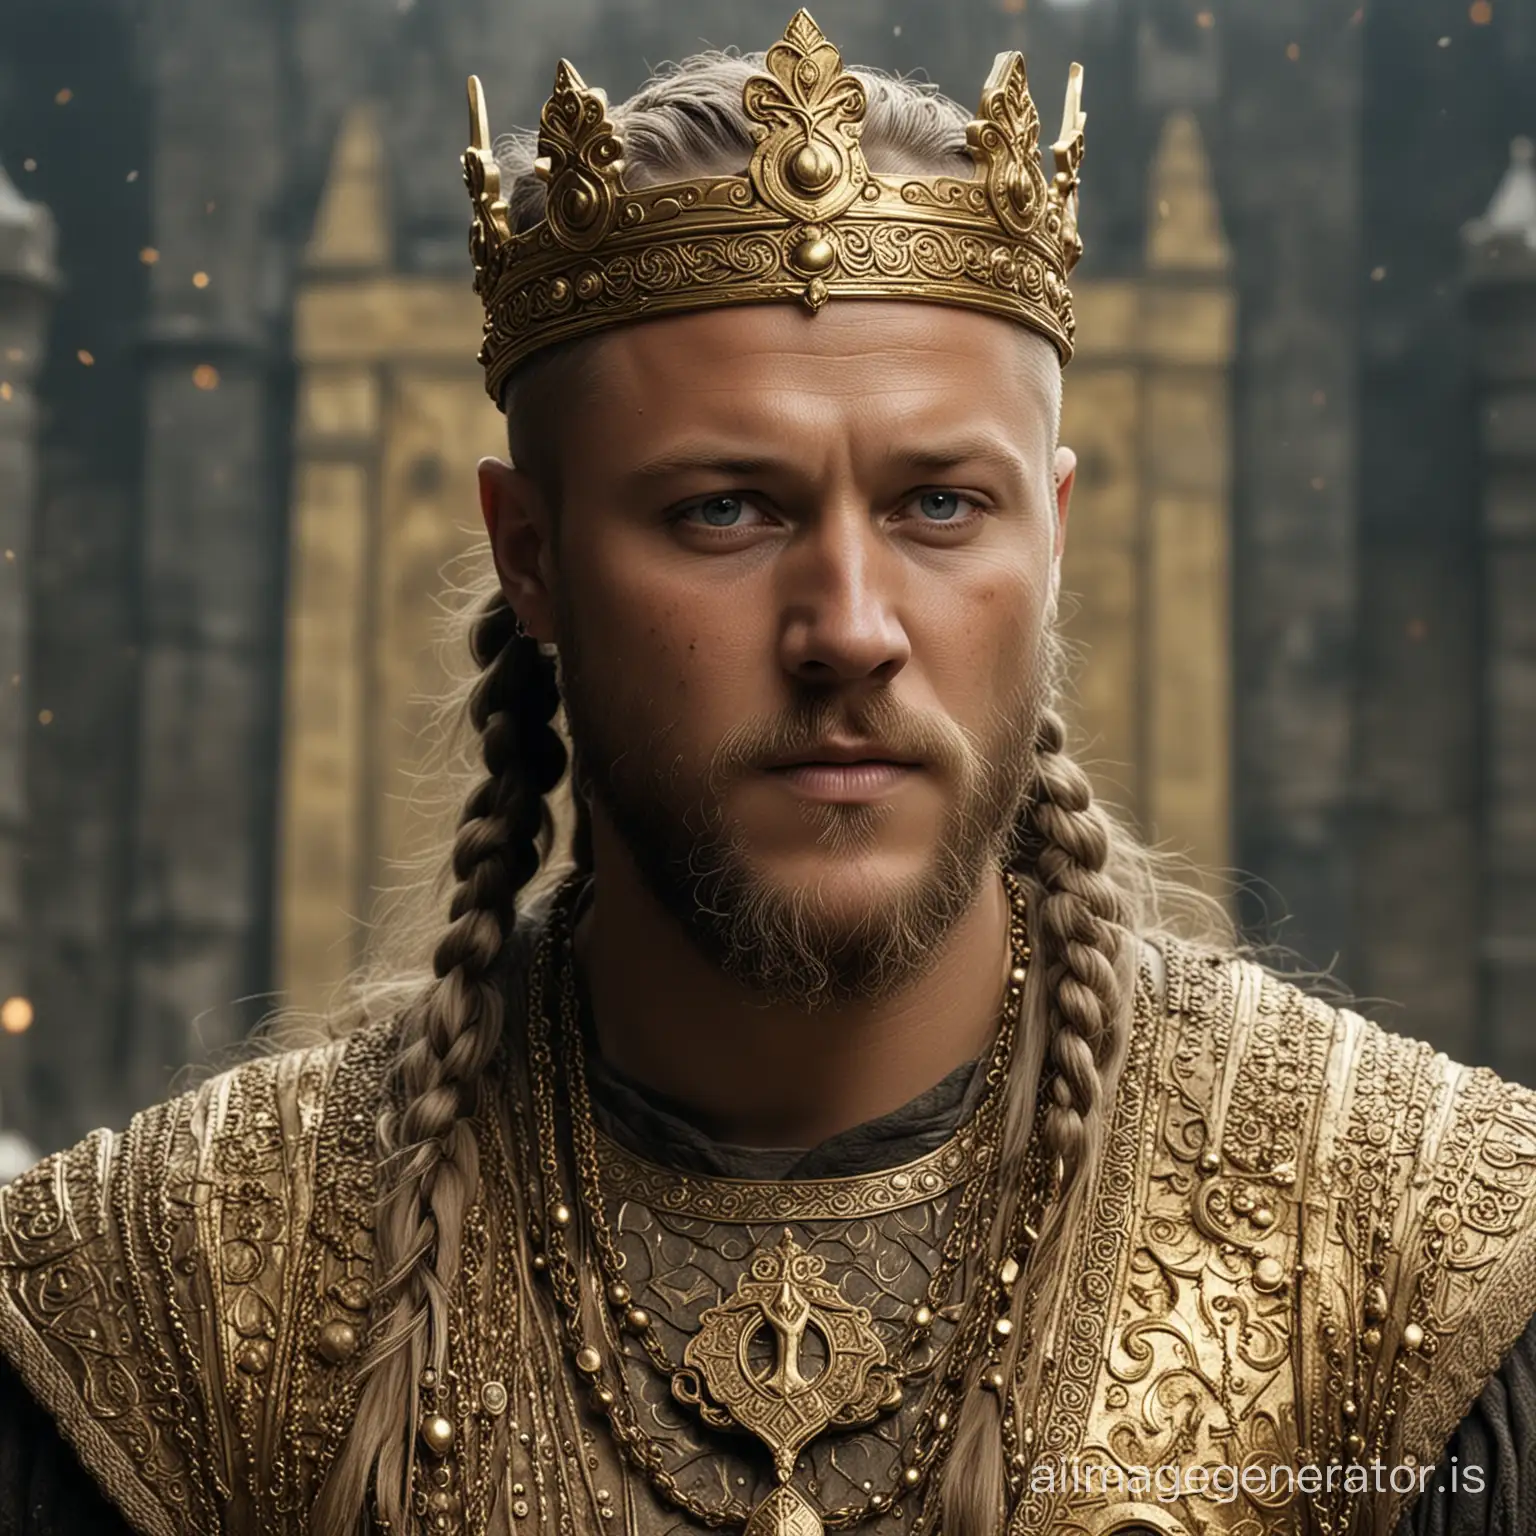 Generate a image of Ragnar Lothbrok in a castle surrounded by gold and wealth